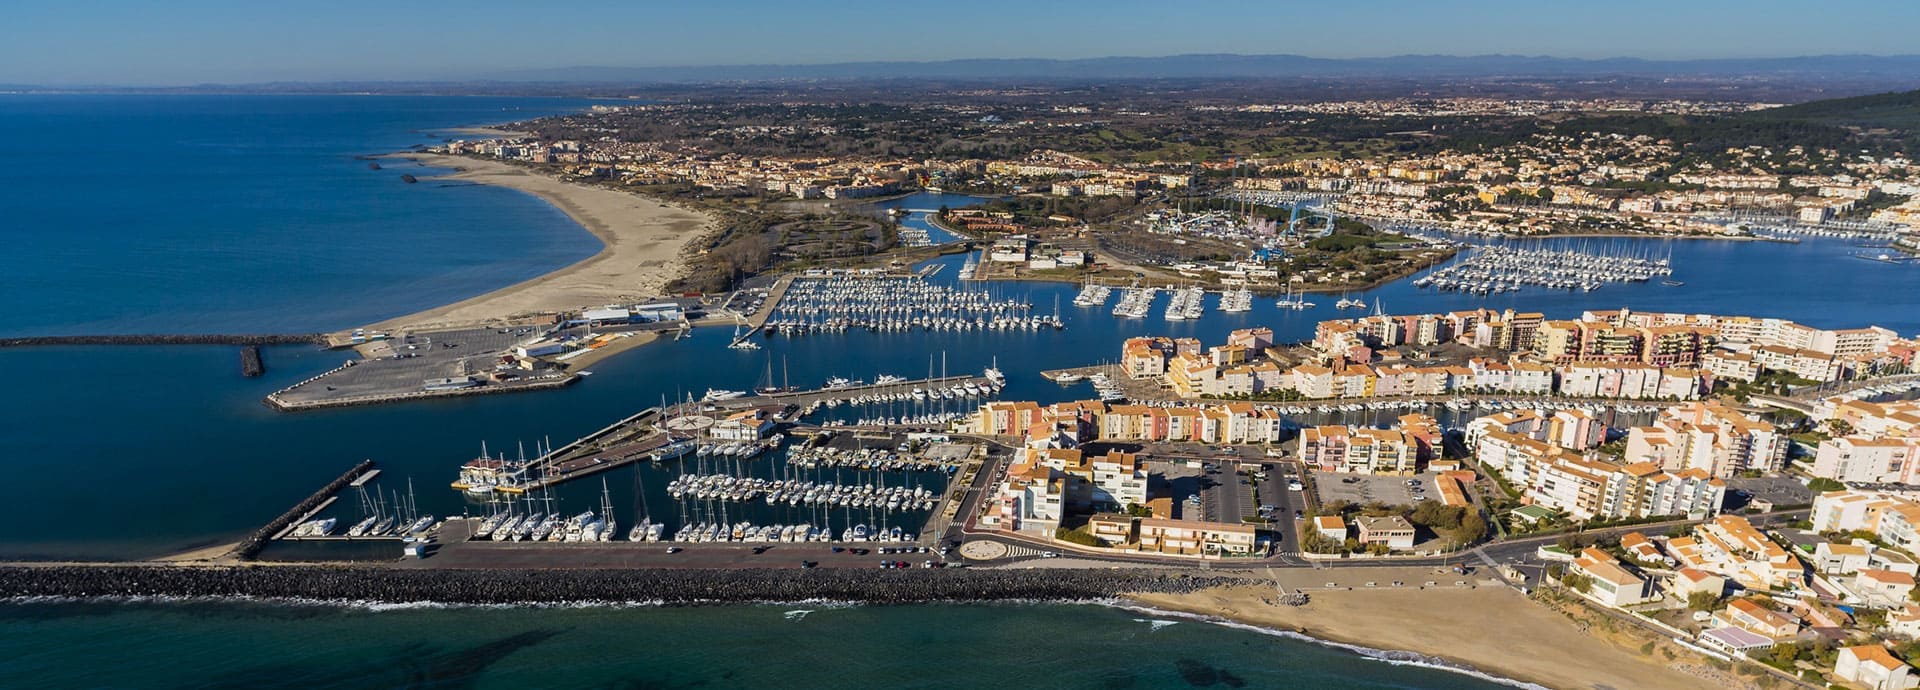 View of Sète from the air